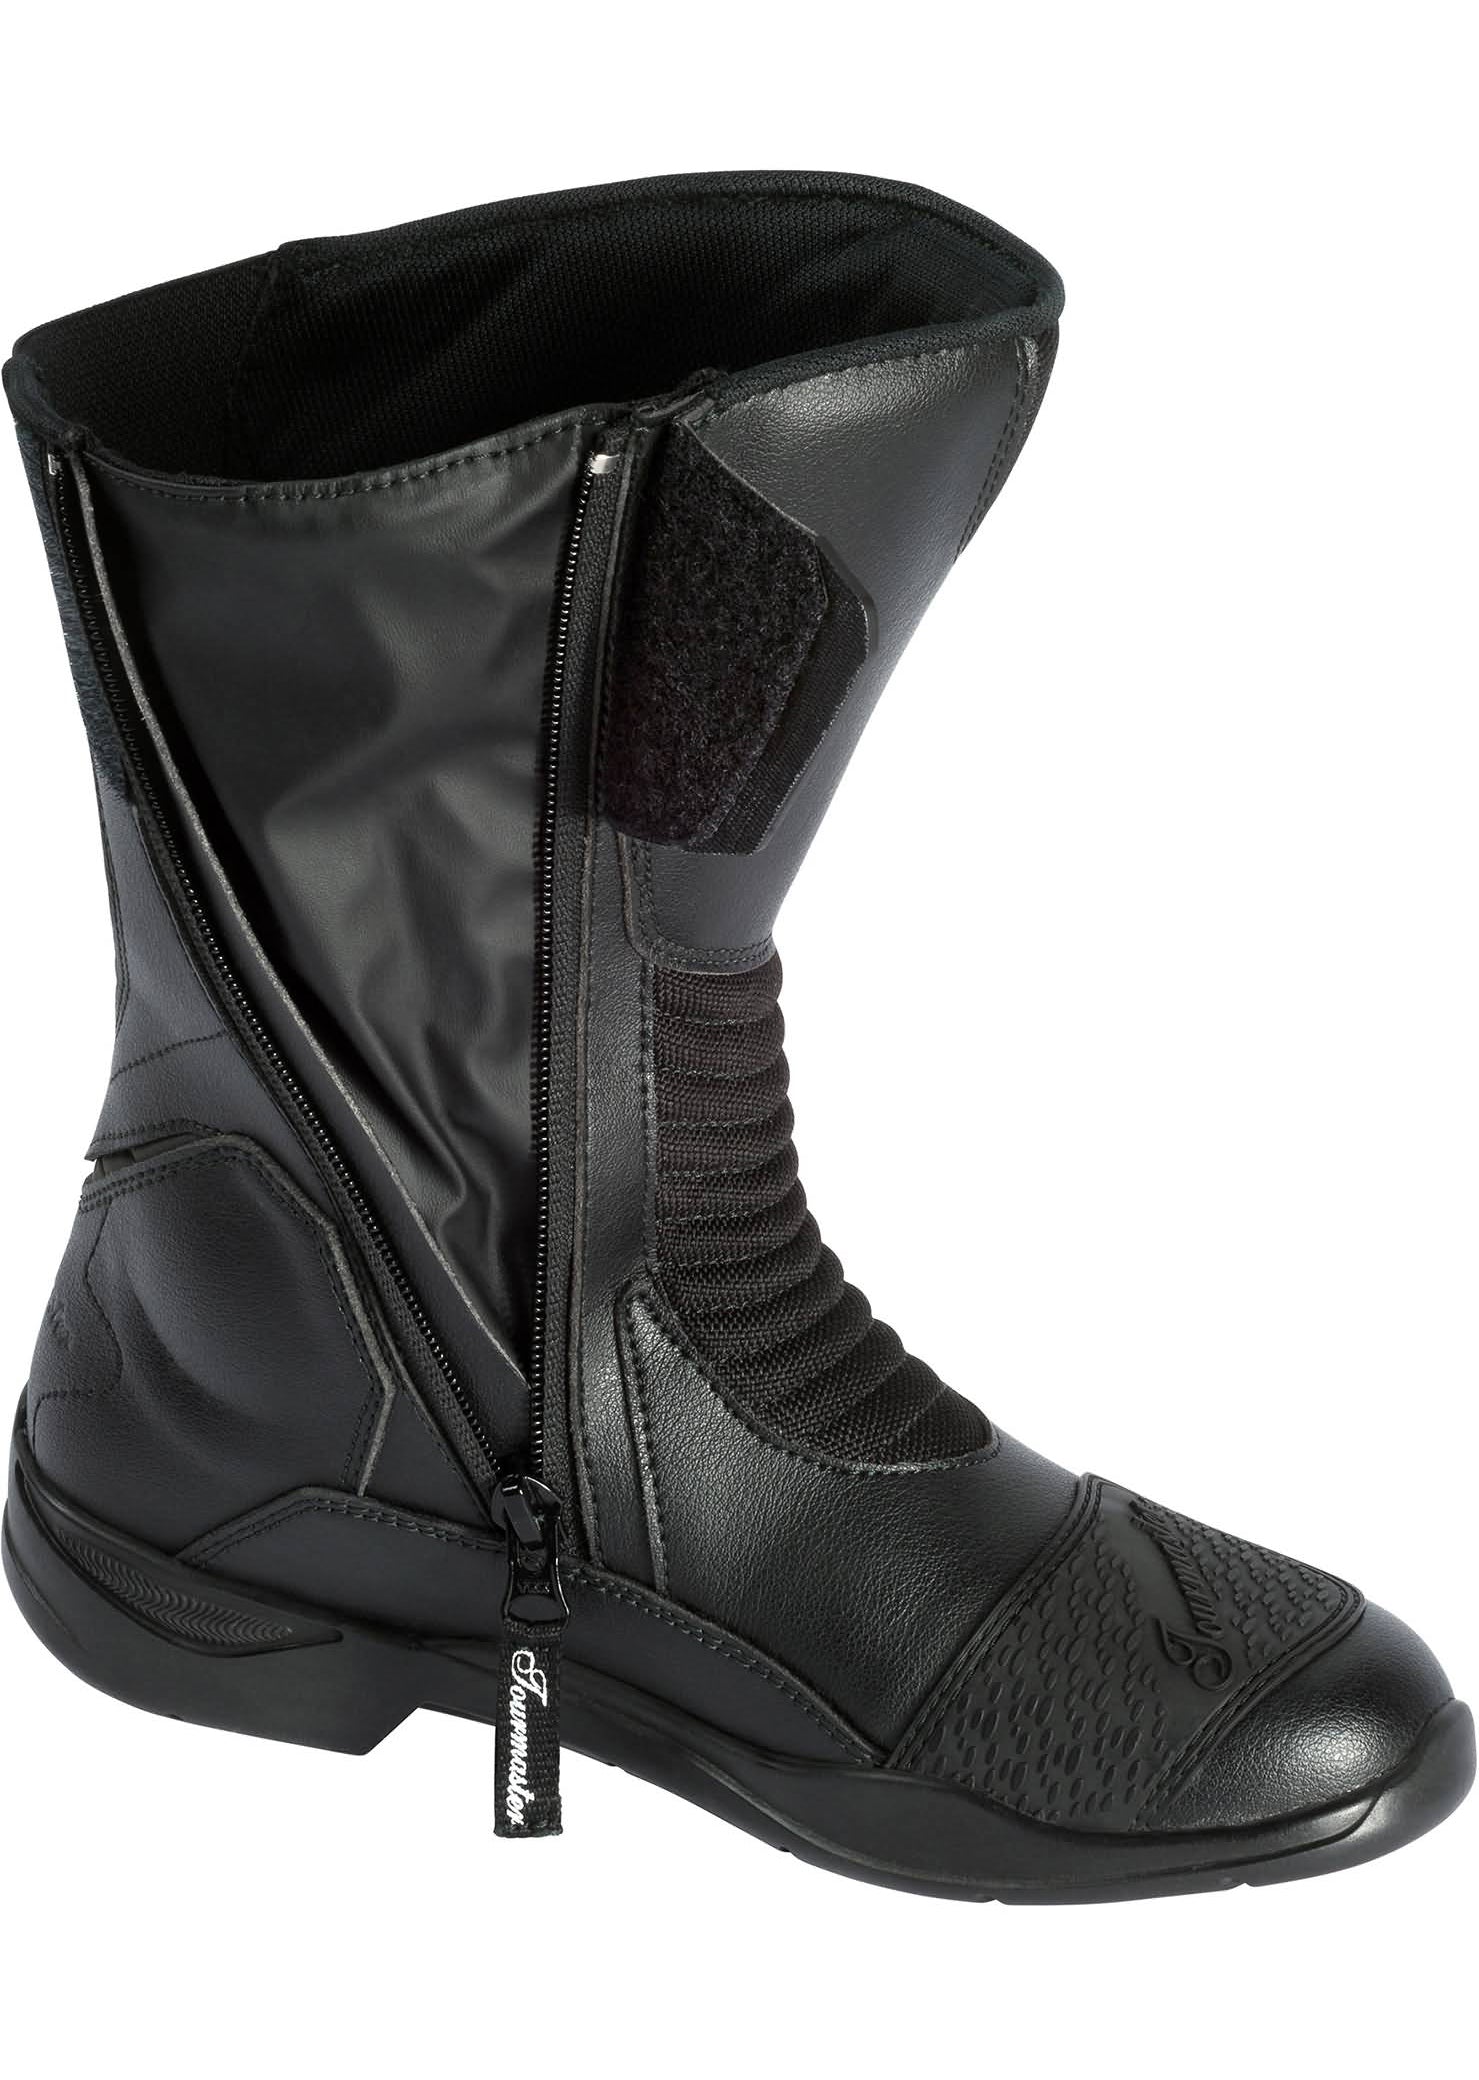 Tour Master Cafe Racer Series Motorcycle Apparel & Footwear Review